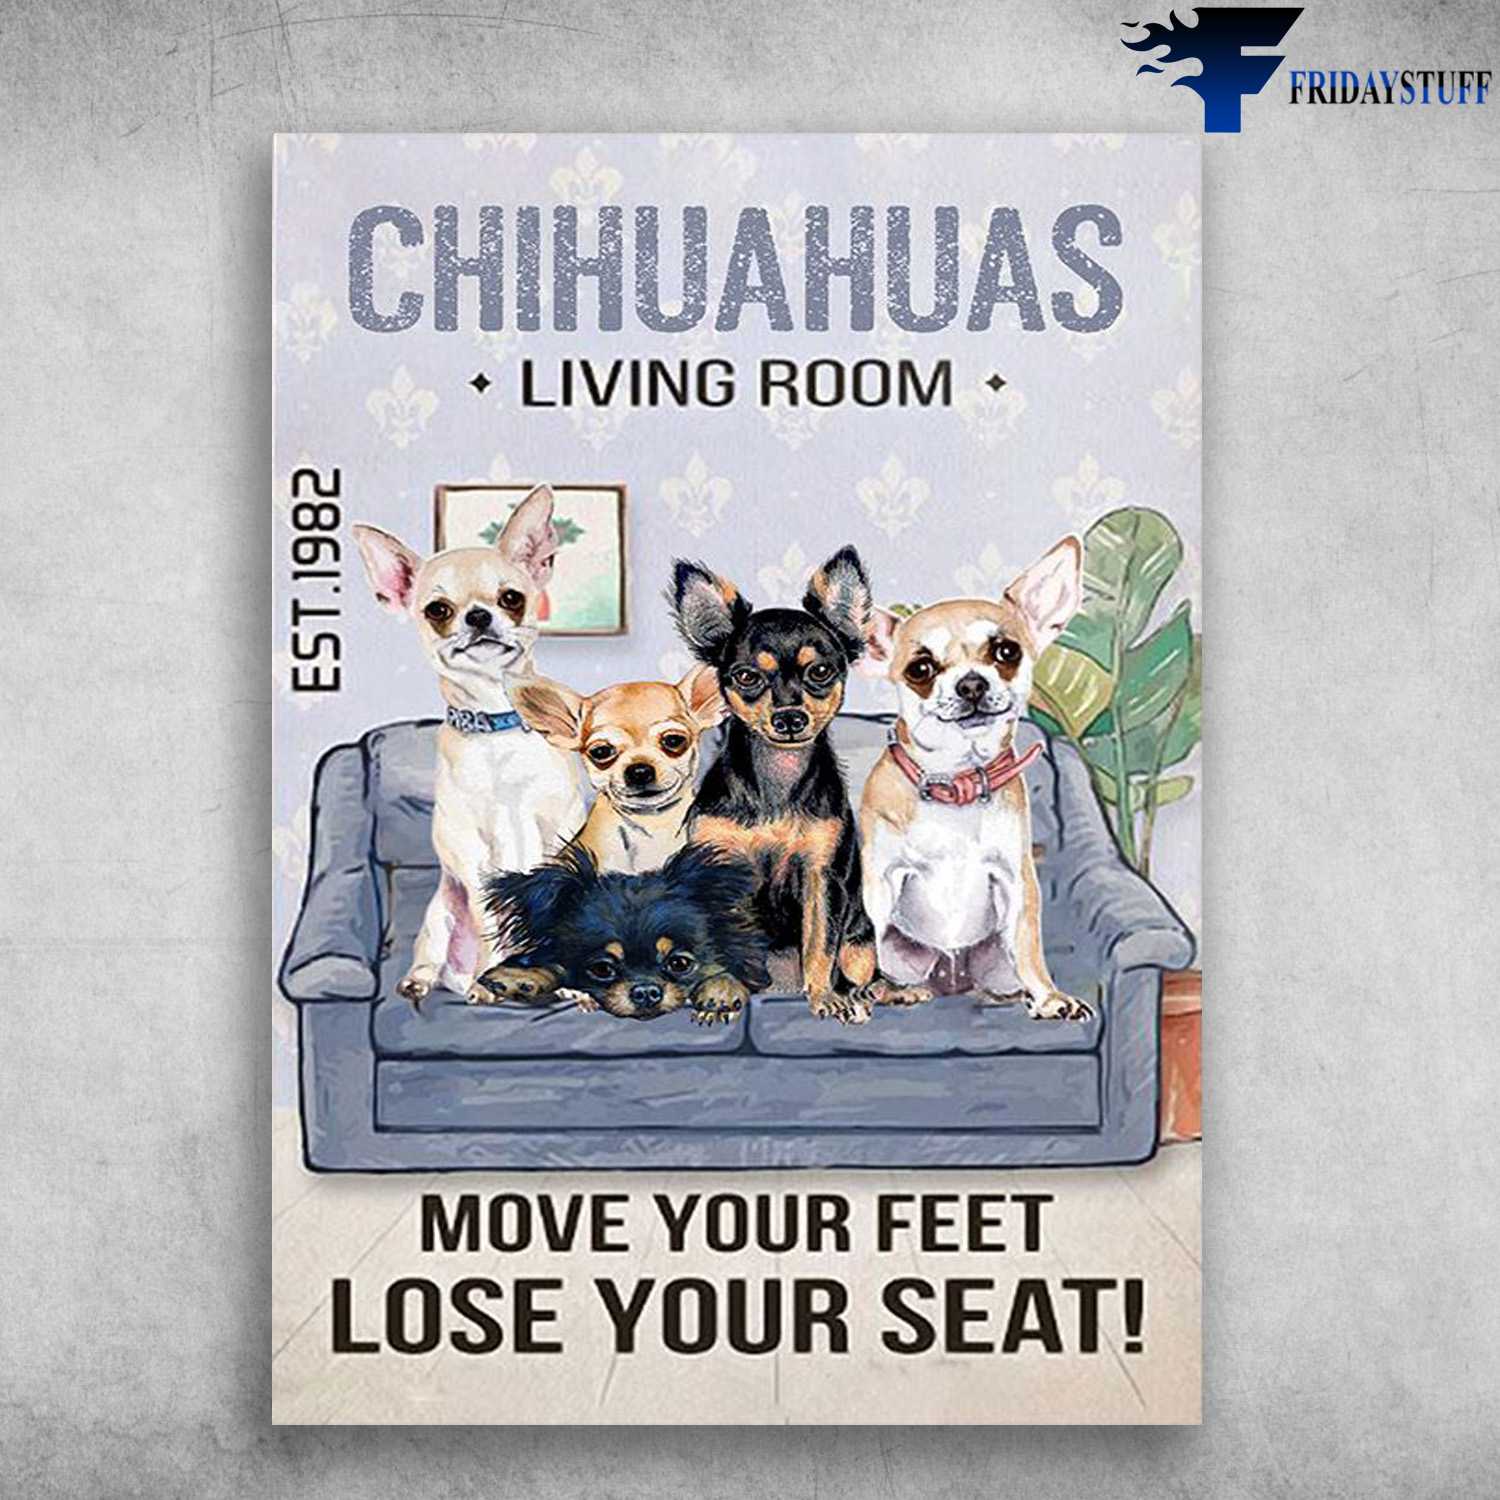 Chihuahuas Family - Chihuahuas Living Room, Love Your Feet, Lose Your Seat, Dog Lover